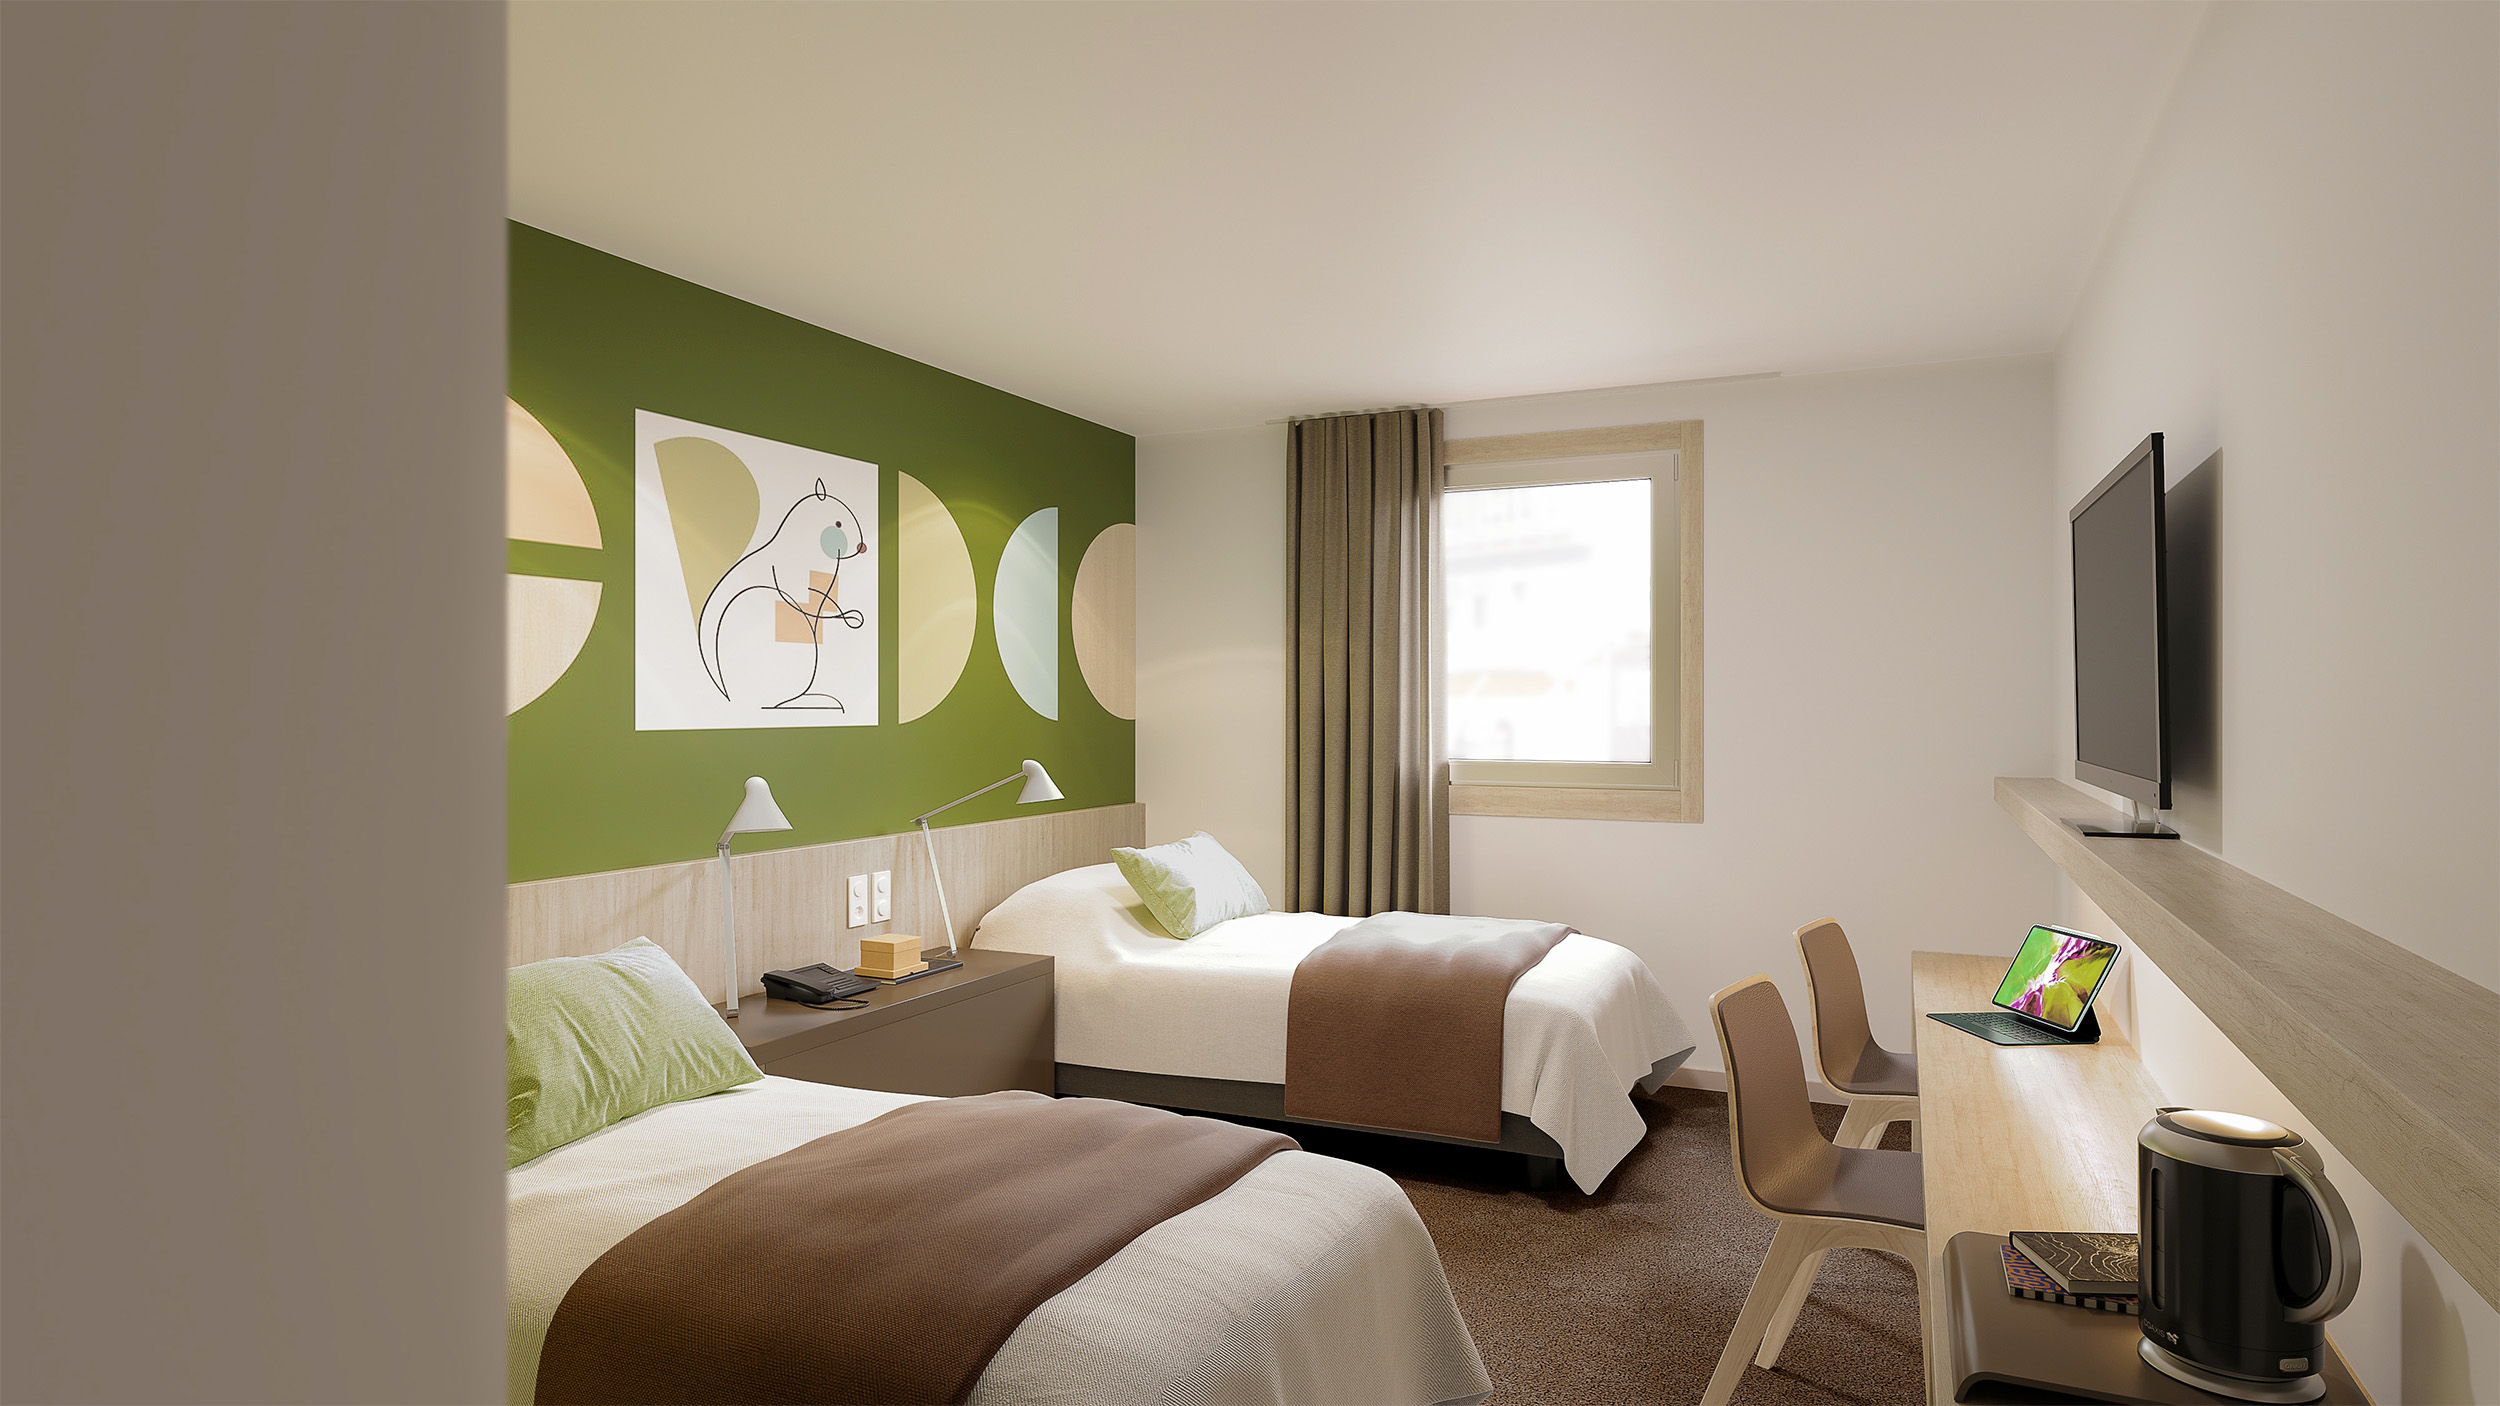 realisation-architecture-hotel-projet-rebranding-ibis-styles-chambres-optiondinterieur